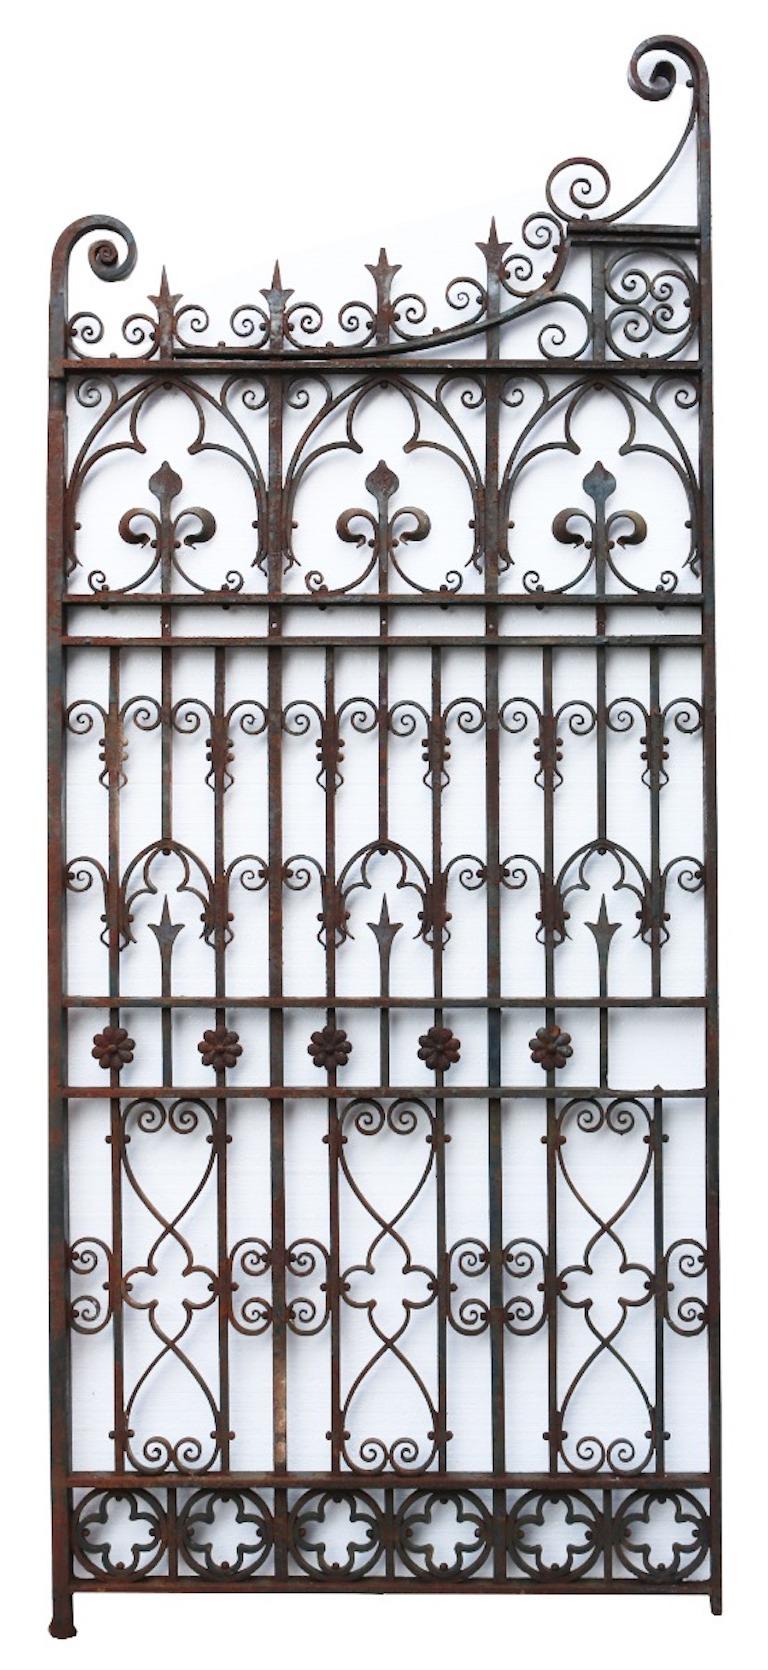 A very well made English wrought iron garden or pedestrian gate. Blacksmith made.

Additional dimensions

Height 234 cm is the tallest part.